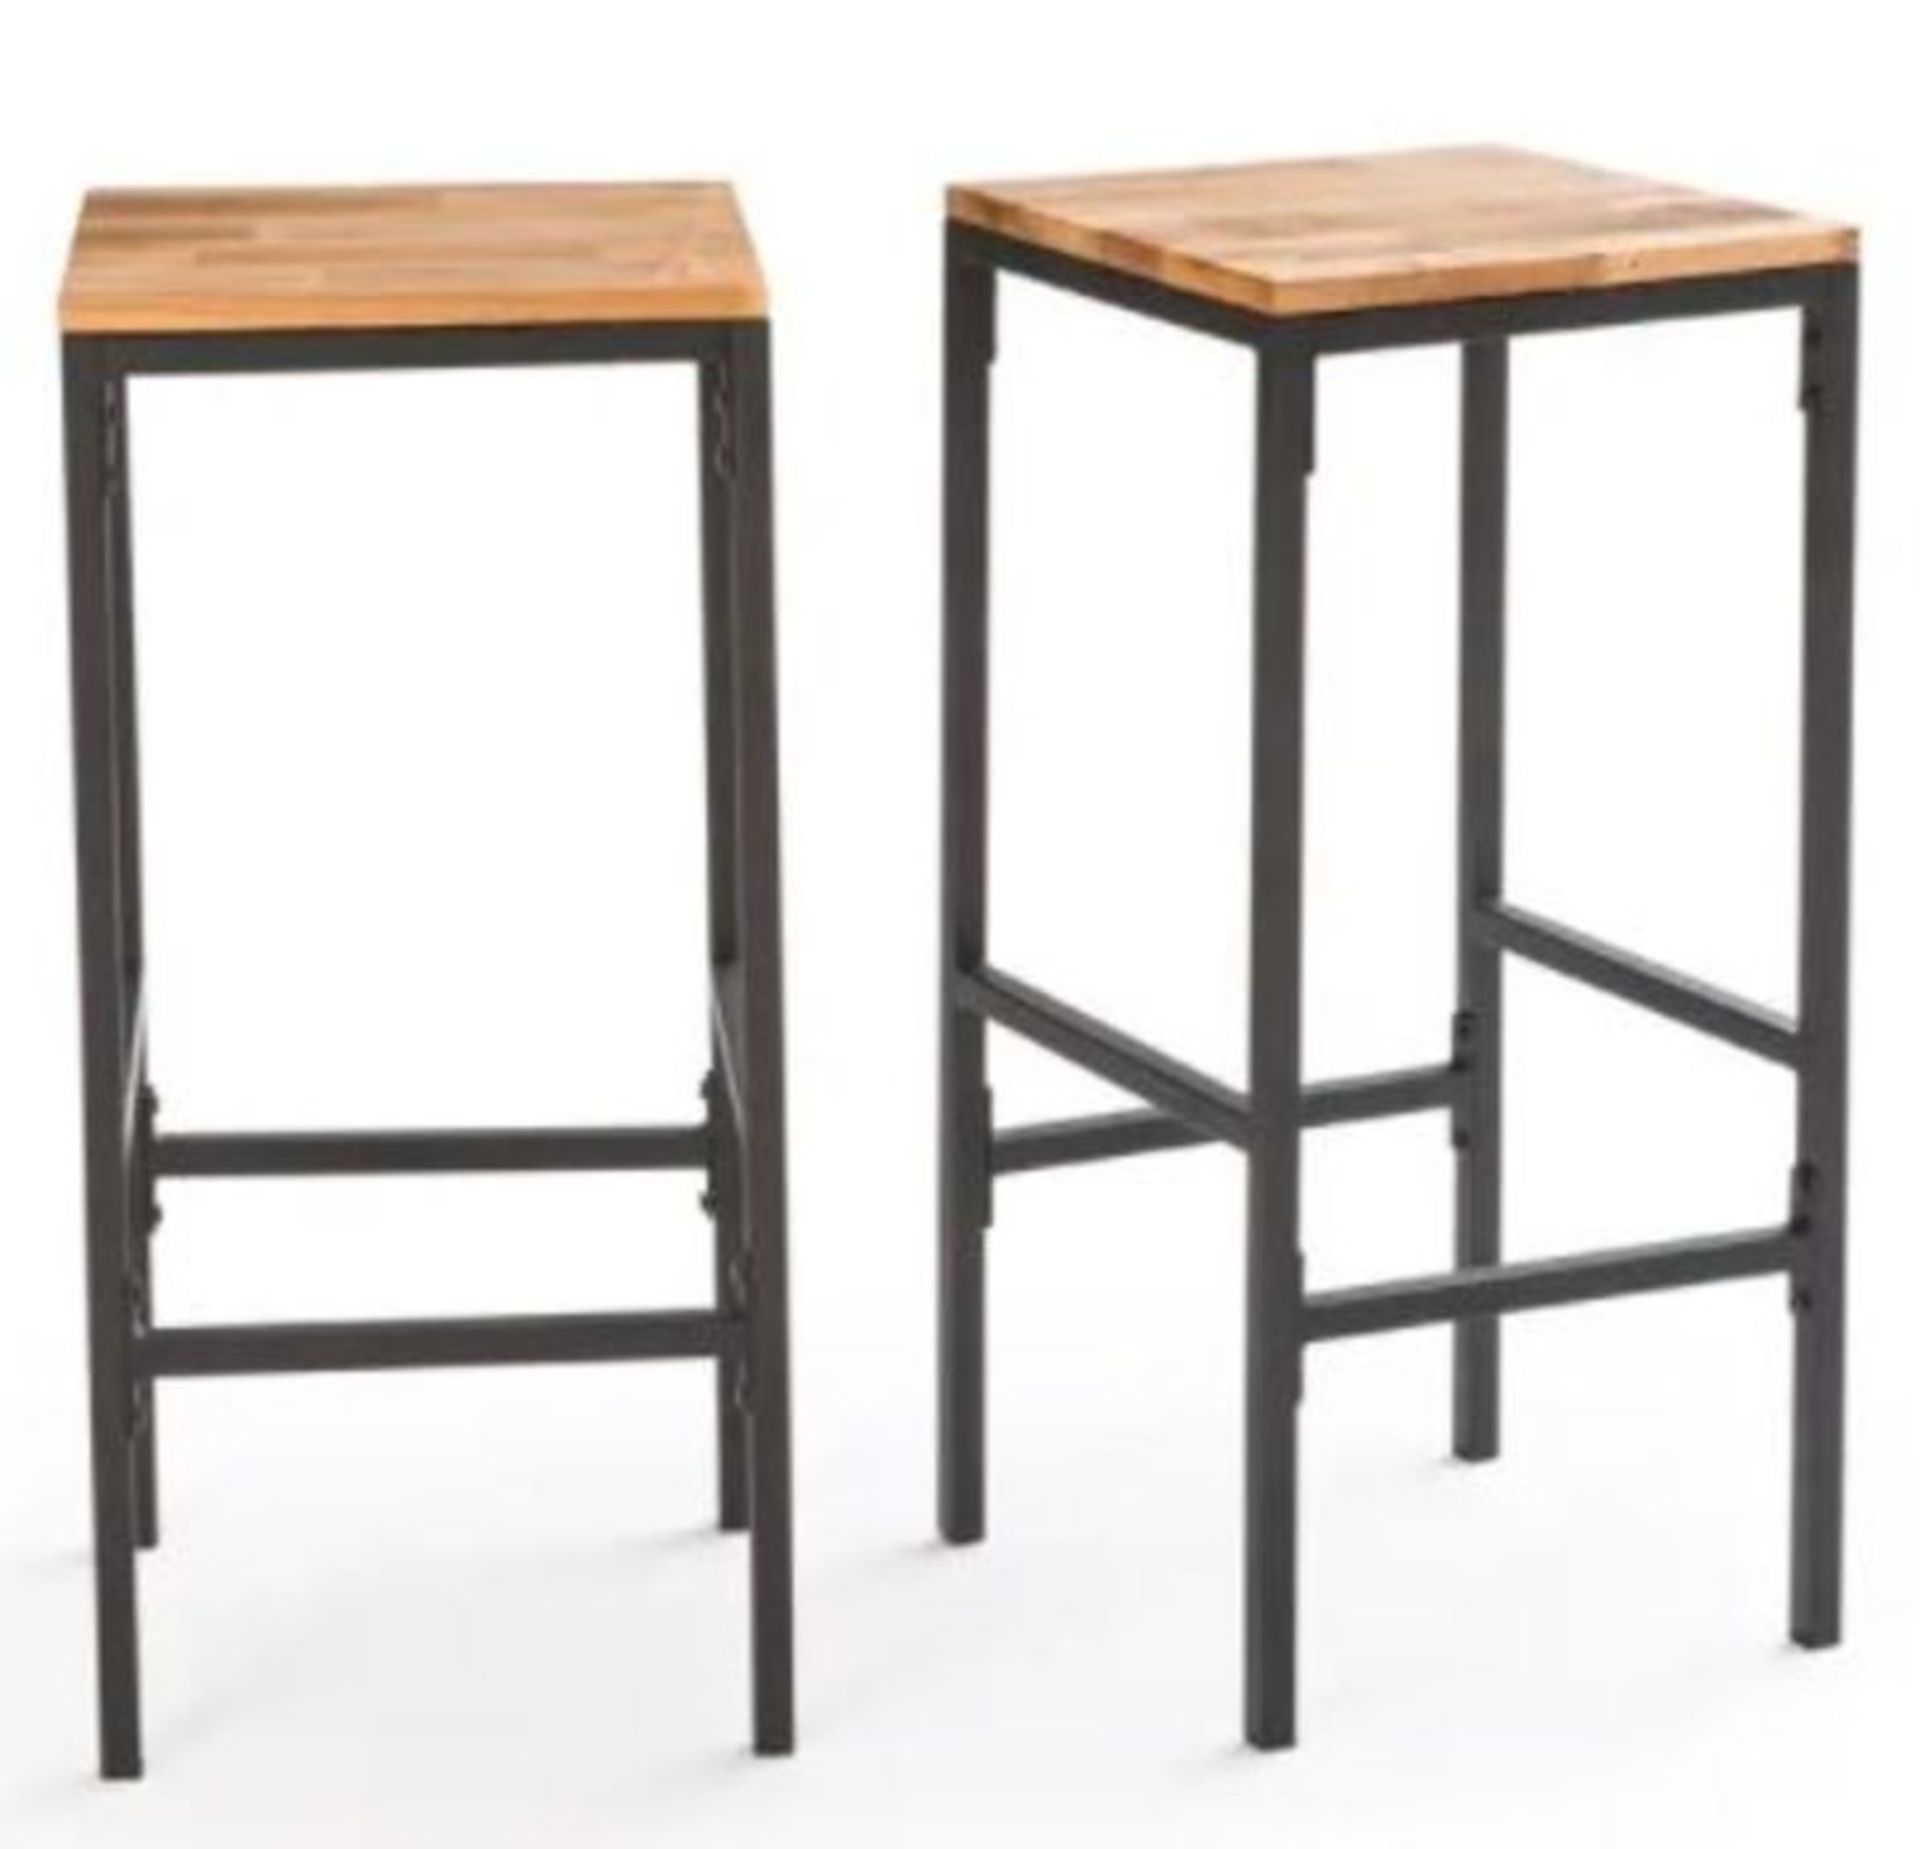 LA REDOUTE SET OF 2 HIBA HIGH BAR STOOLS IN SOLID OAK AND STEEL